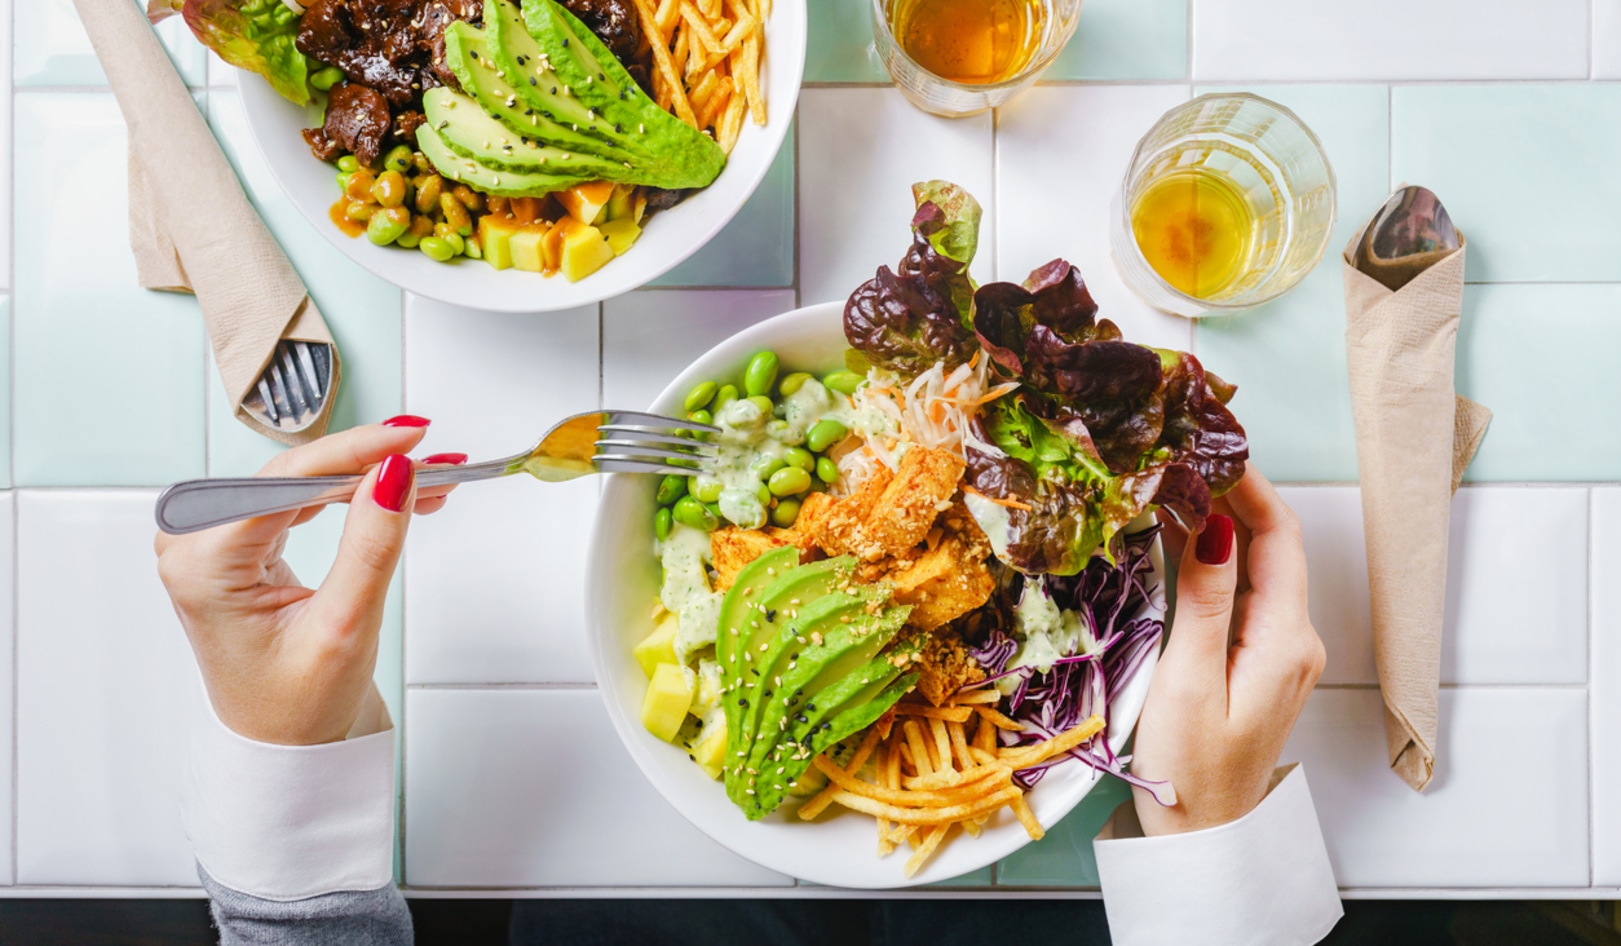 Two Studies Make the Case For Eating a Lot More Plants for Your Health and the Planet